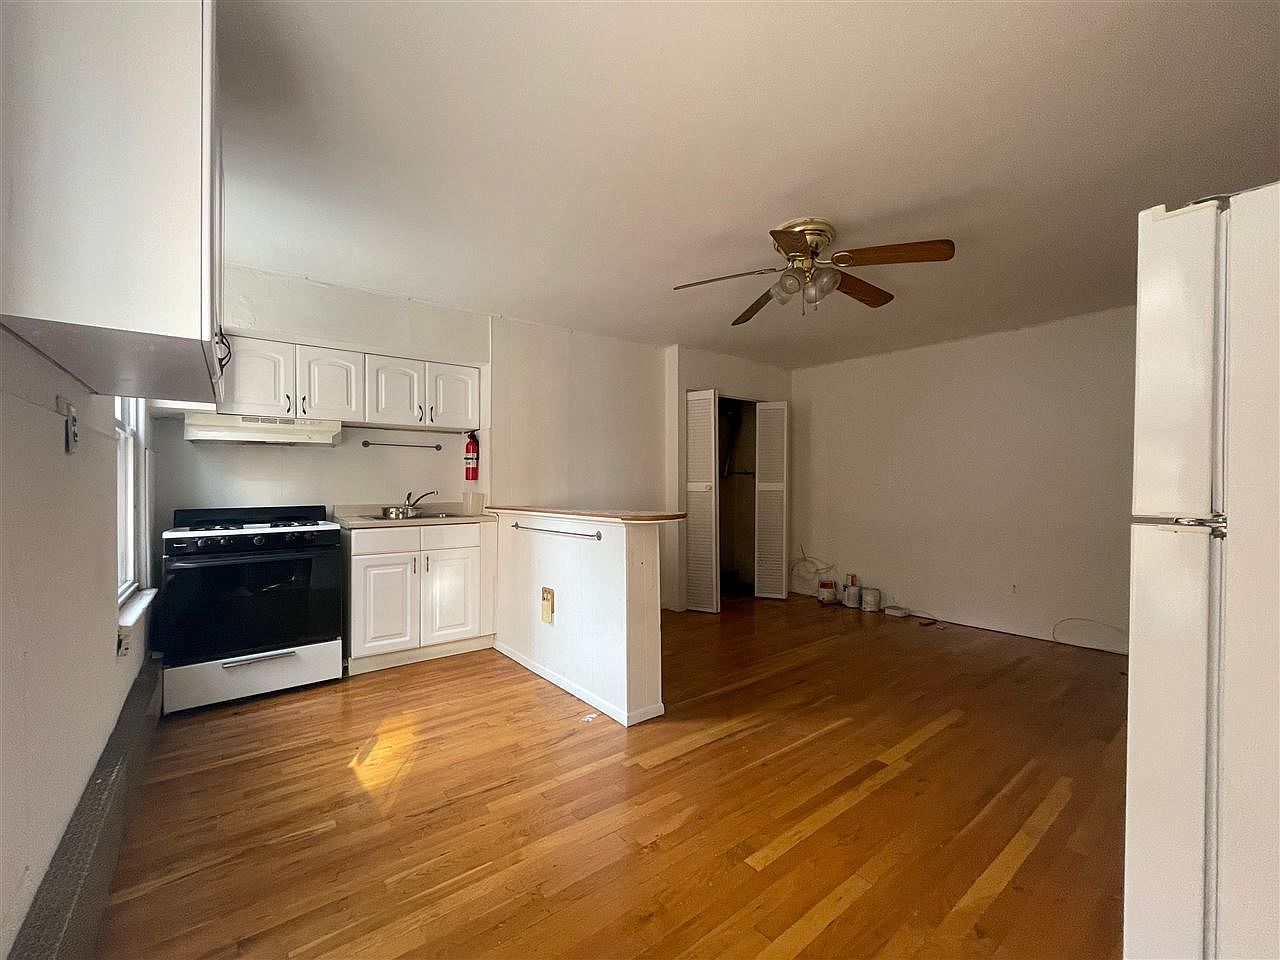 Bright 3 bedroom 1 bath apartment located on 3rd and Bloomfield. Close to path, parks, buses. One block away from Washington St. Apartment features newly renovated hallway and staircase, refinished hardwood floors and great location! Laundromat 1 block away. Available June 1st. One month broker fee. 